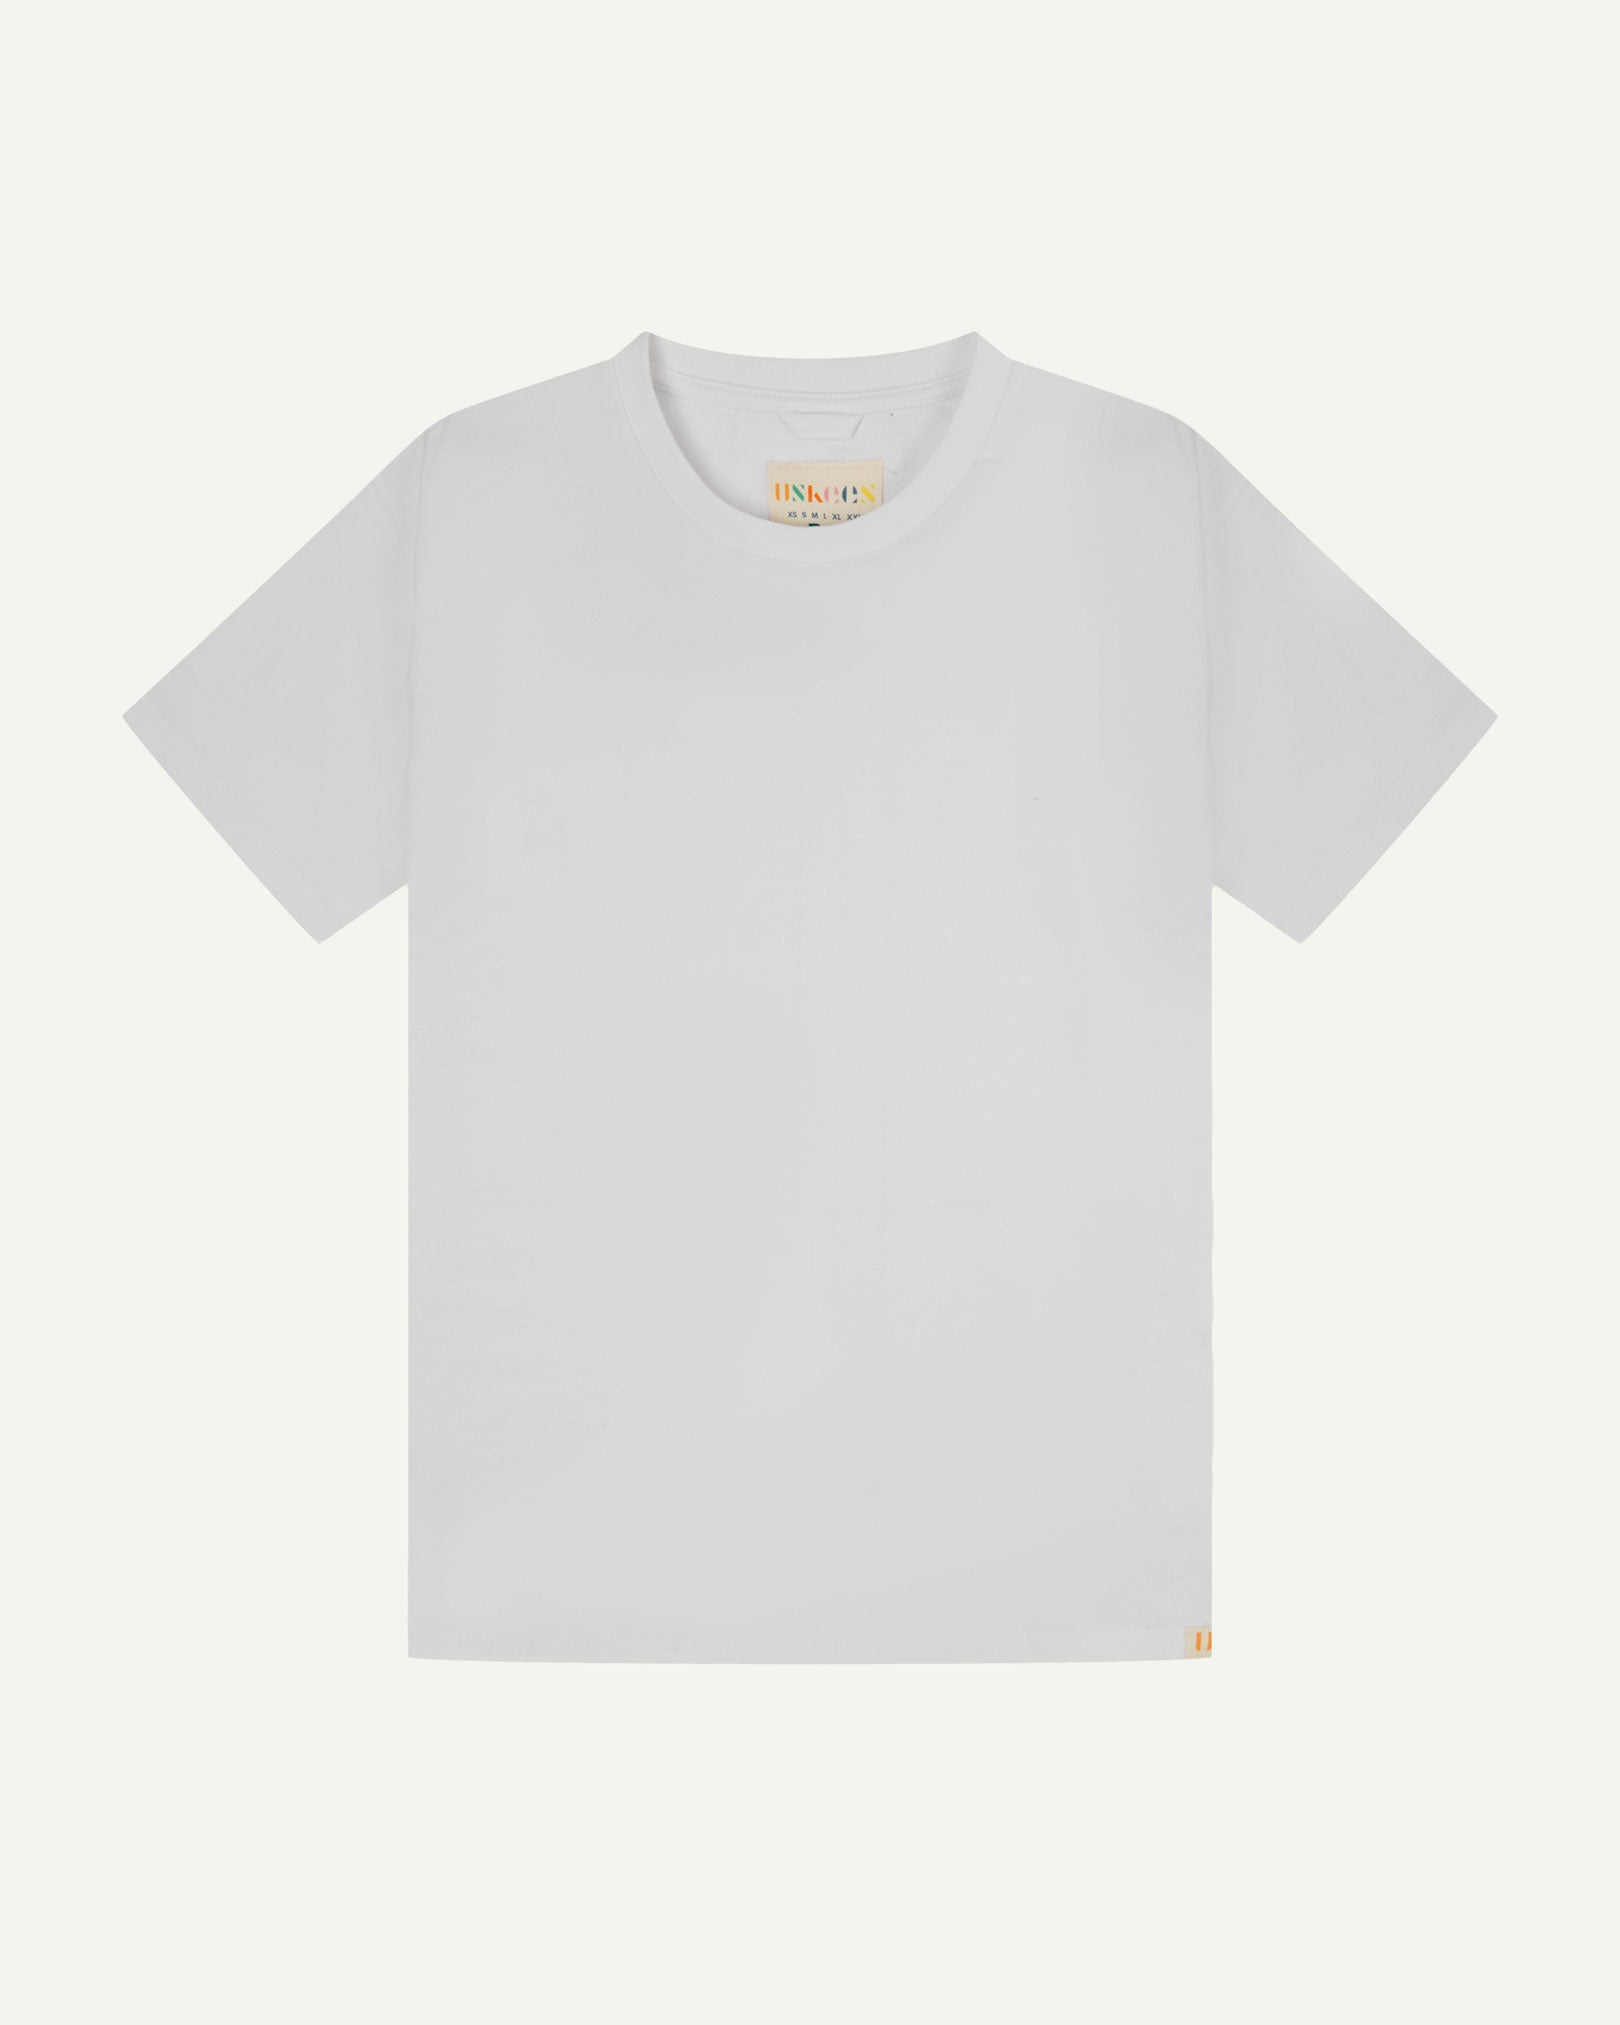 Full flat view of white organic cotton Uskees T-shirt for men.